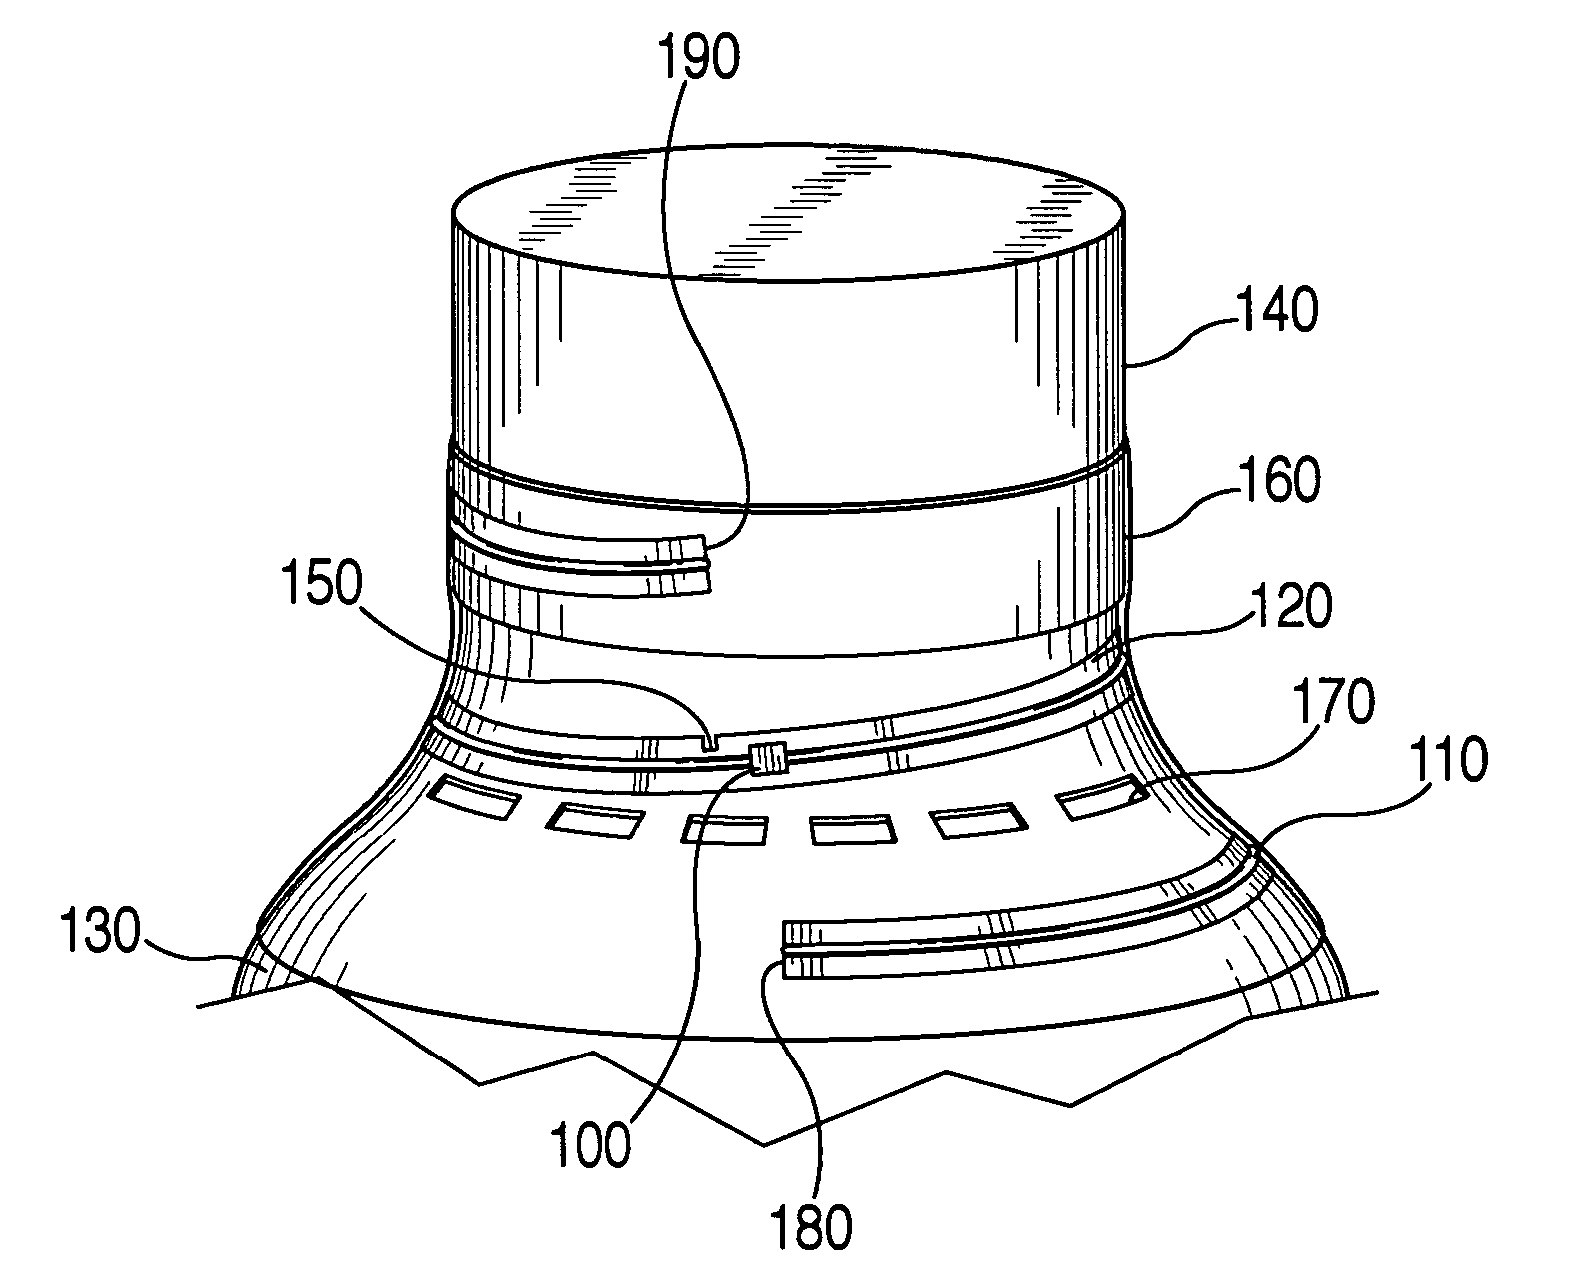 Apparatus and method for detecting tampering with containers and preventing counterfeiting thereof